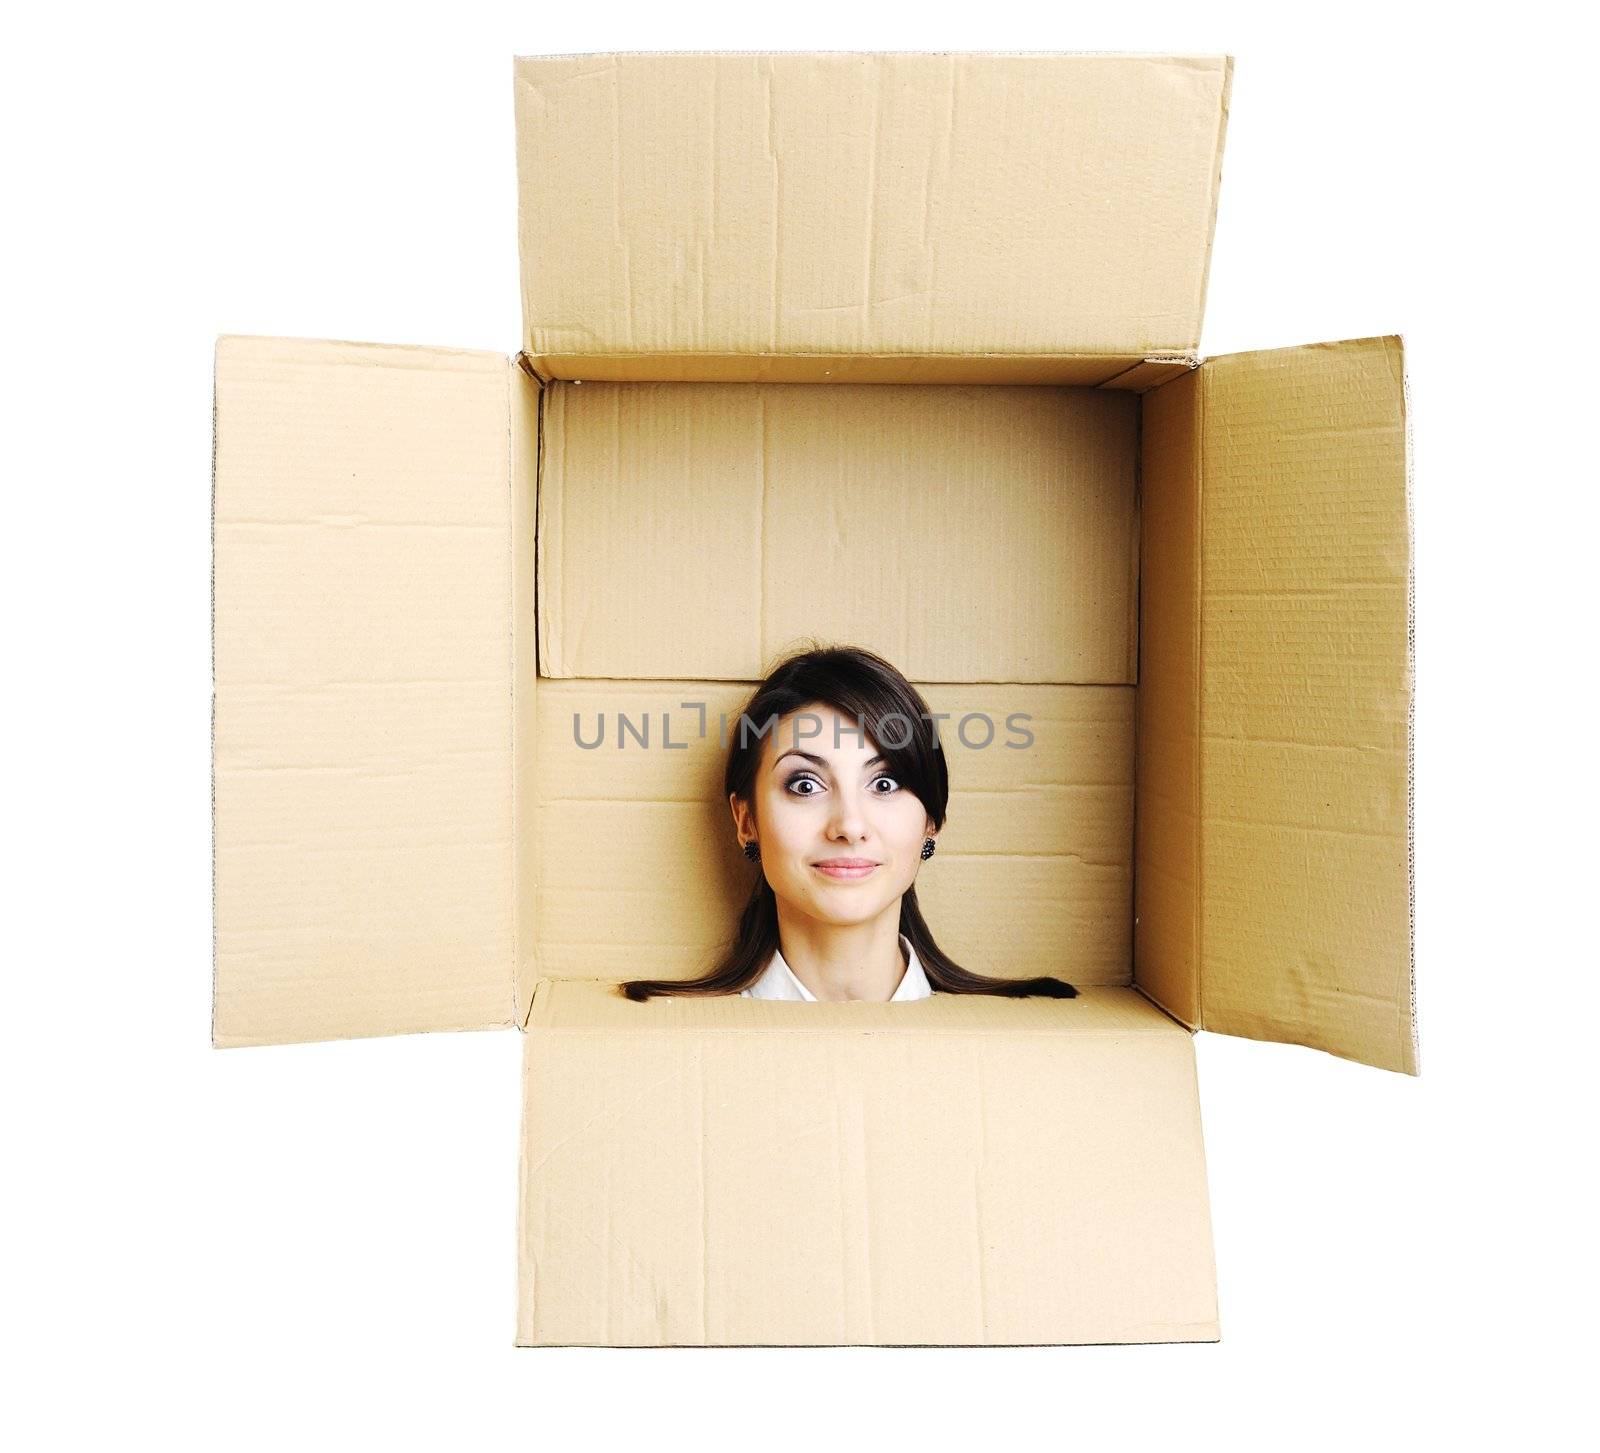 An image of young woman in a box